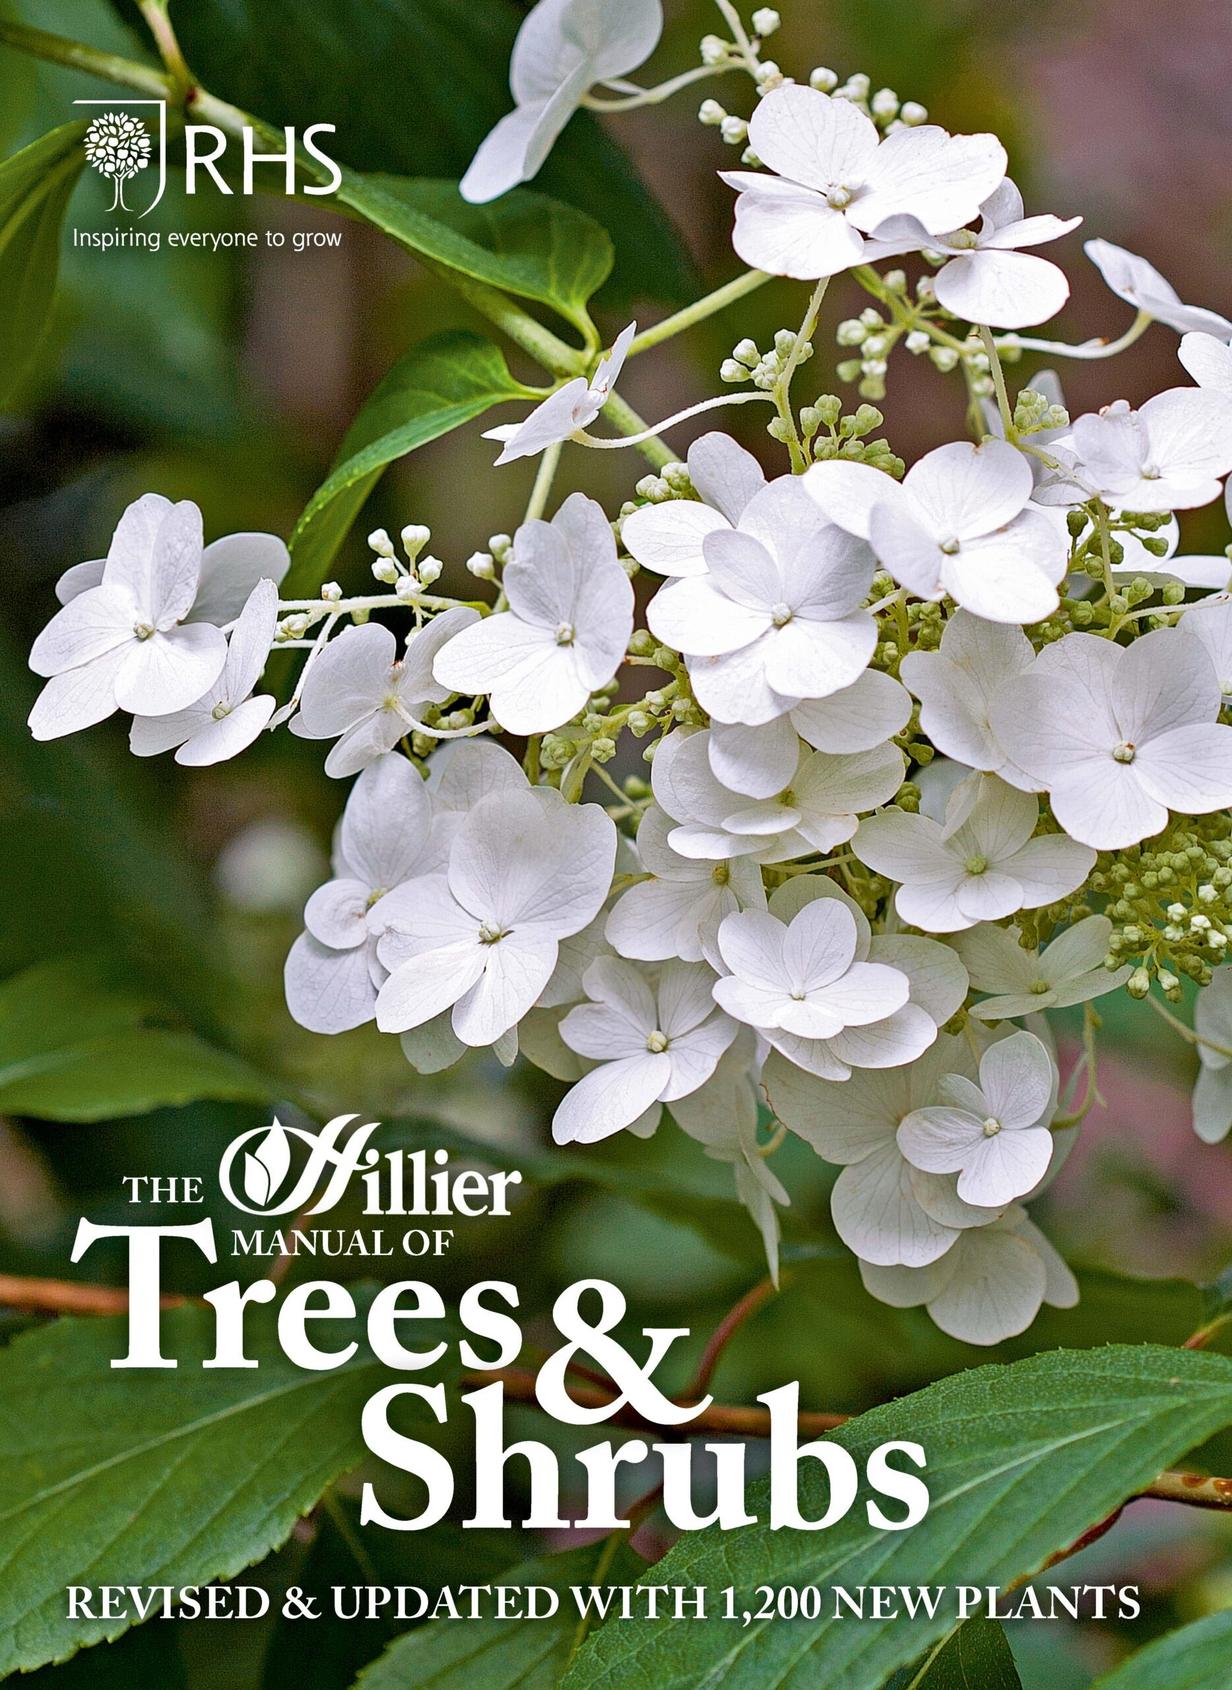 The Hillier Manual of Trees & Shrubs 2019 offers at £19.99 in Hillier Garden Centres